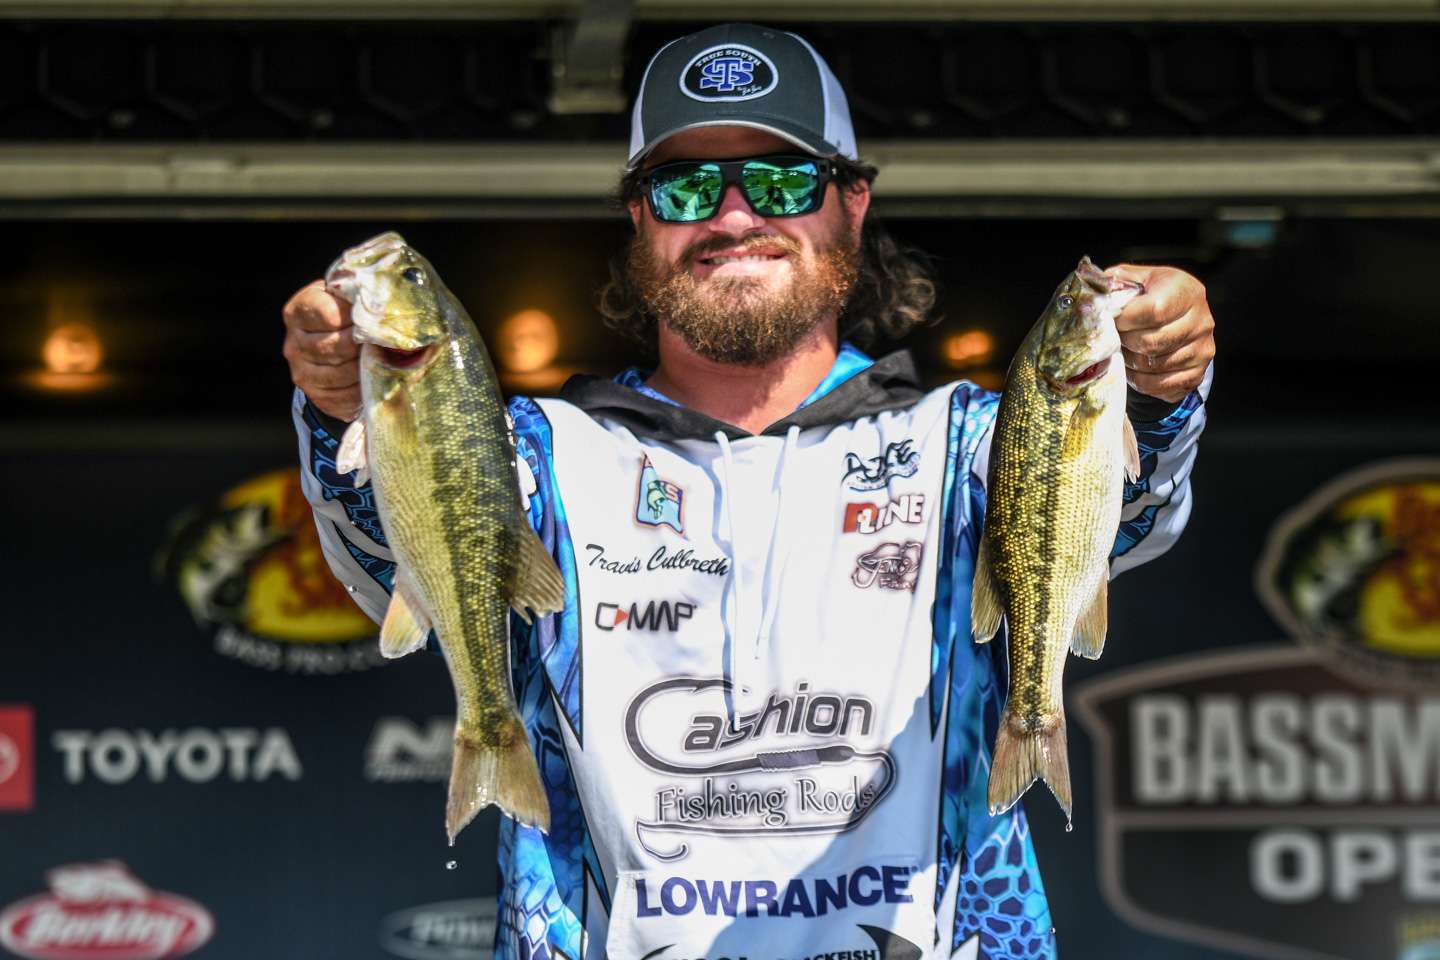 Travis Culbreth, 3rd place co-angler (9-15)